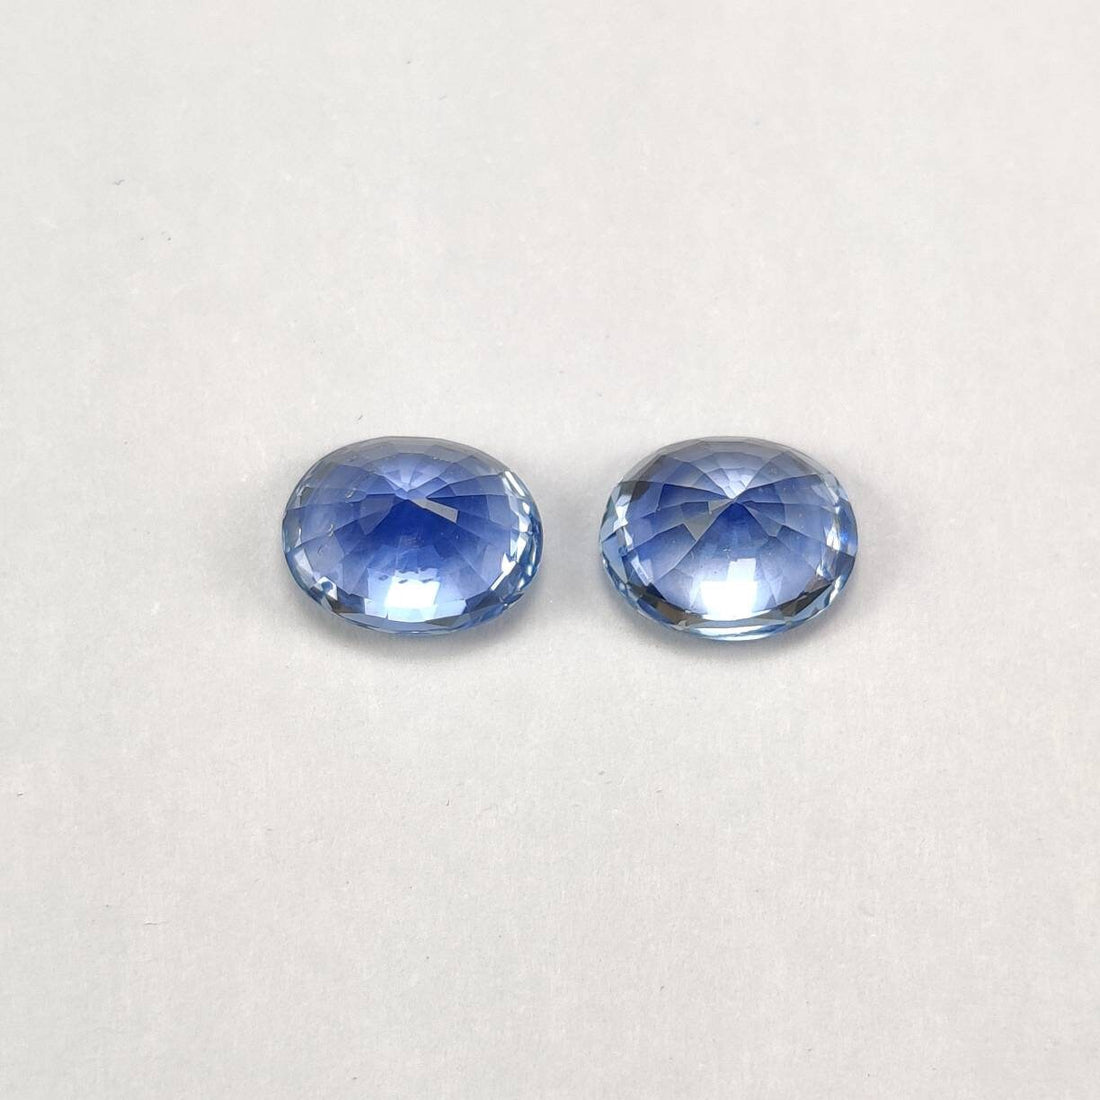 2.91 cts Unheated Natural Pastel Blue Sapphire Loose Gemstone Oval Cut Pair